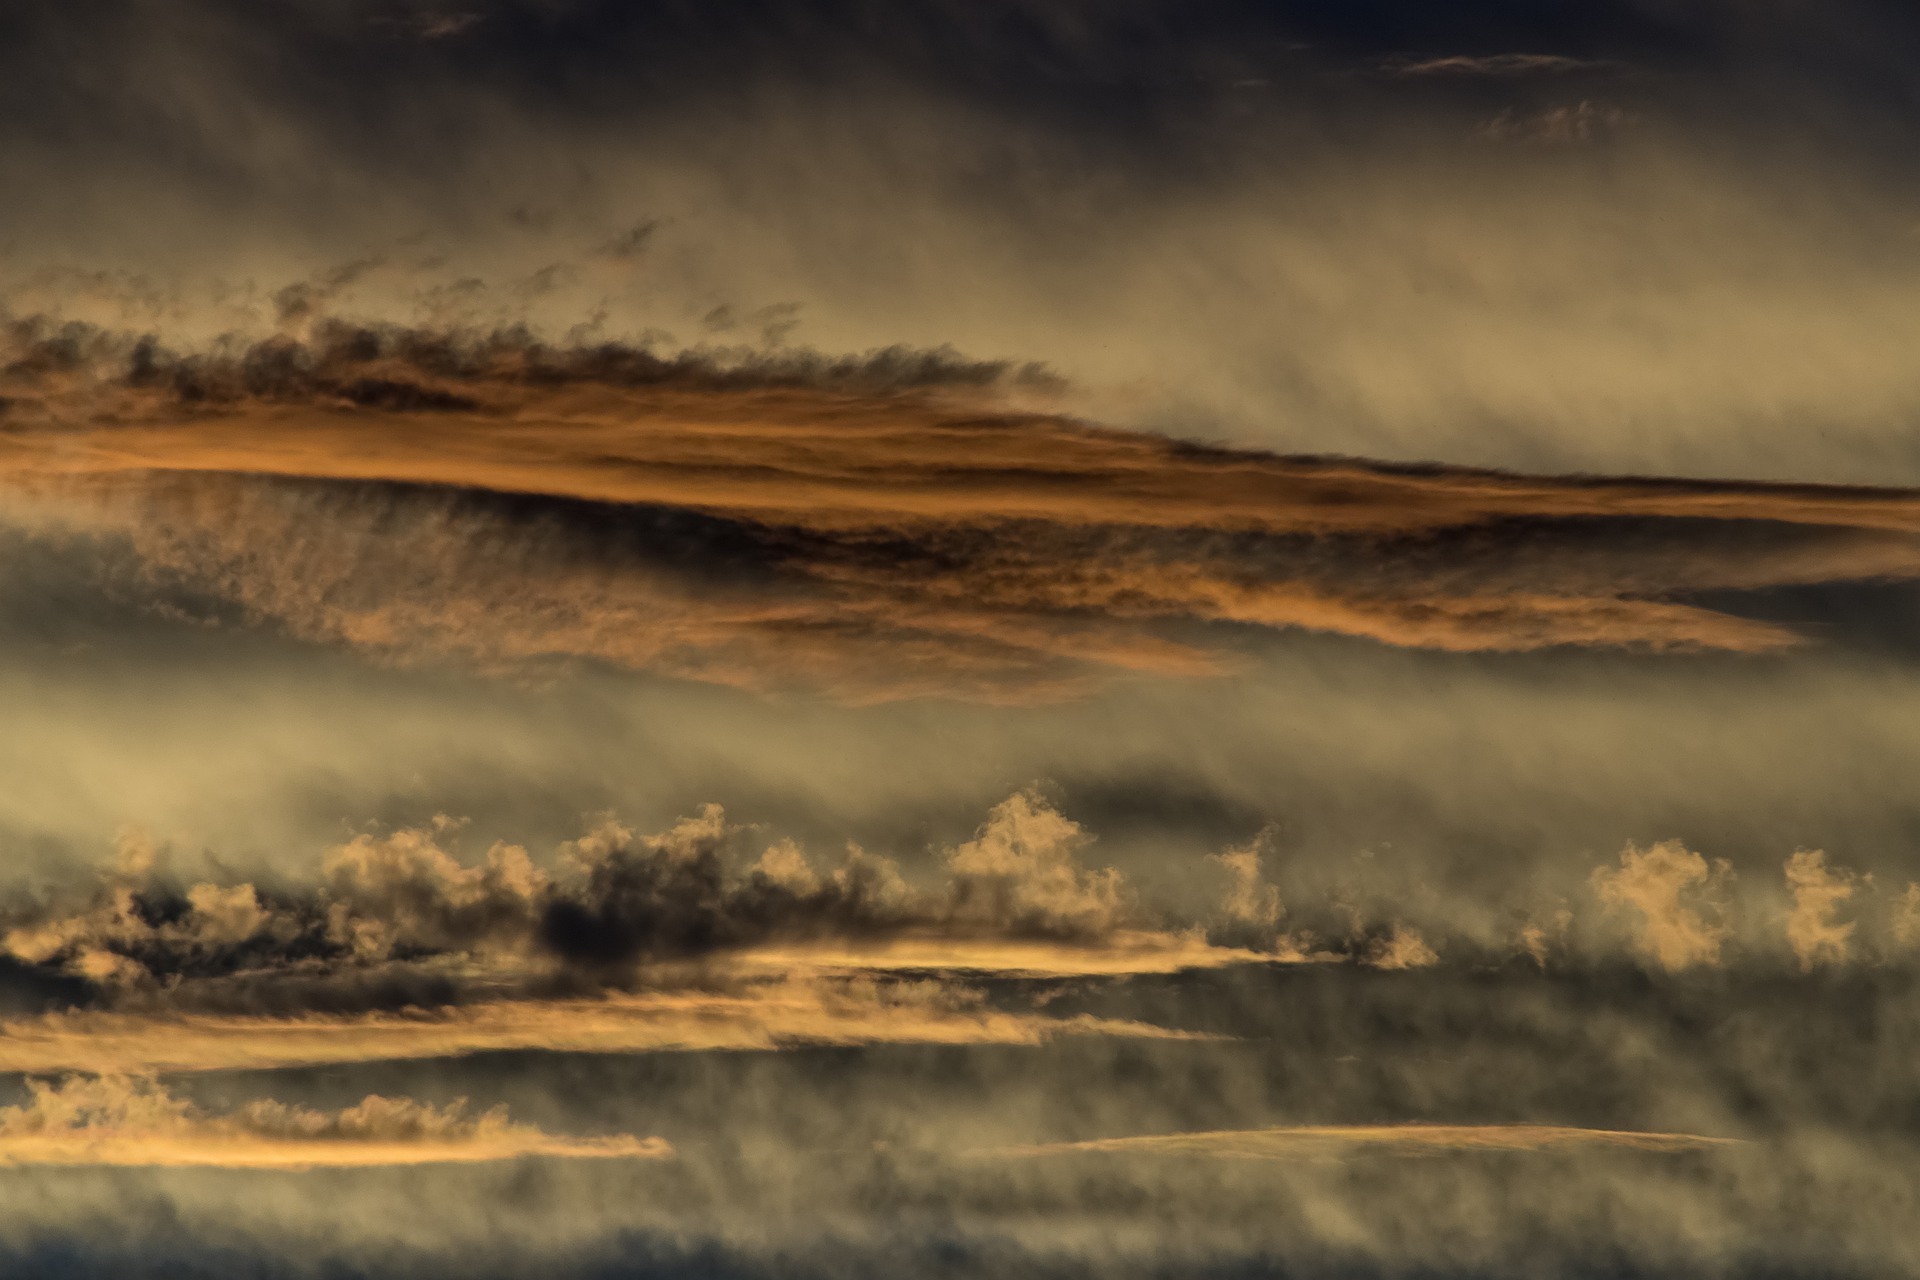 Research brief: New dataset shows NW cloudbands are increasing over Australia